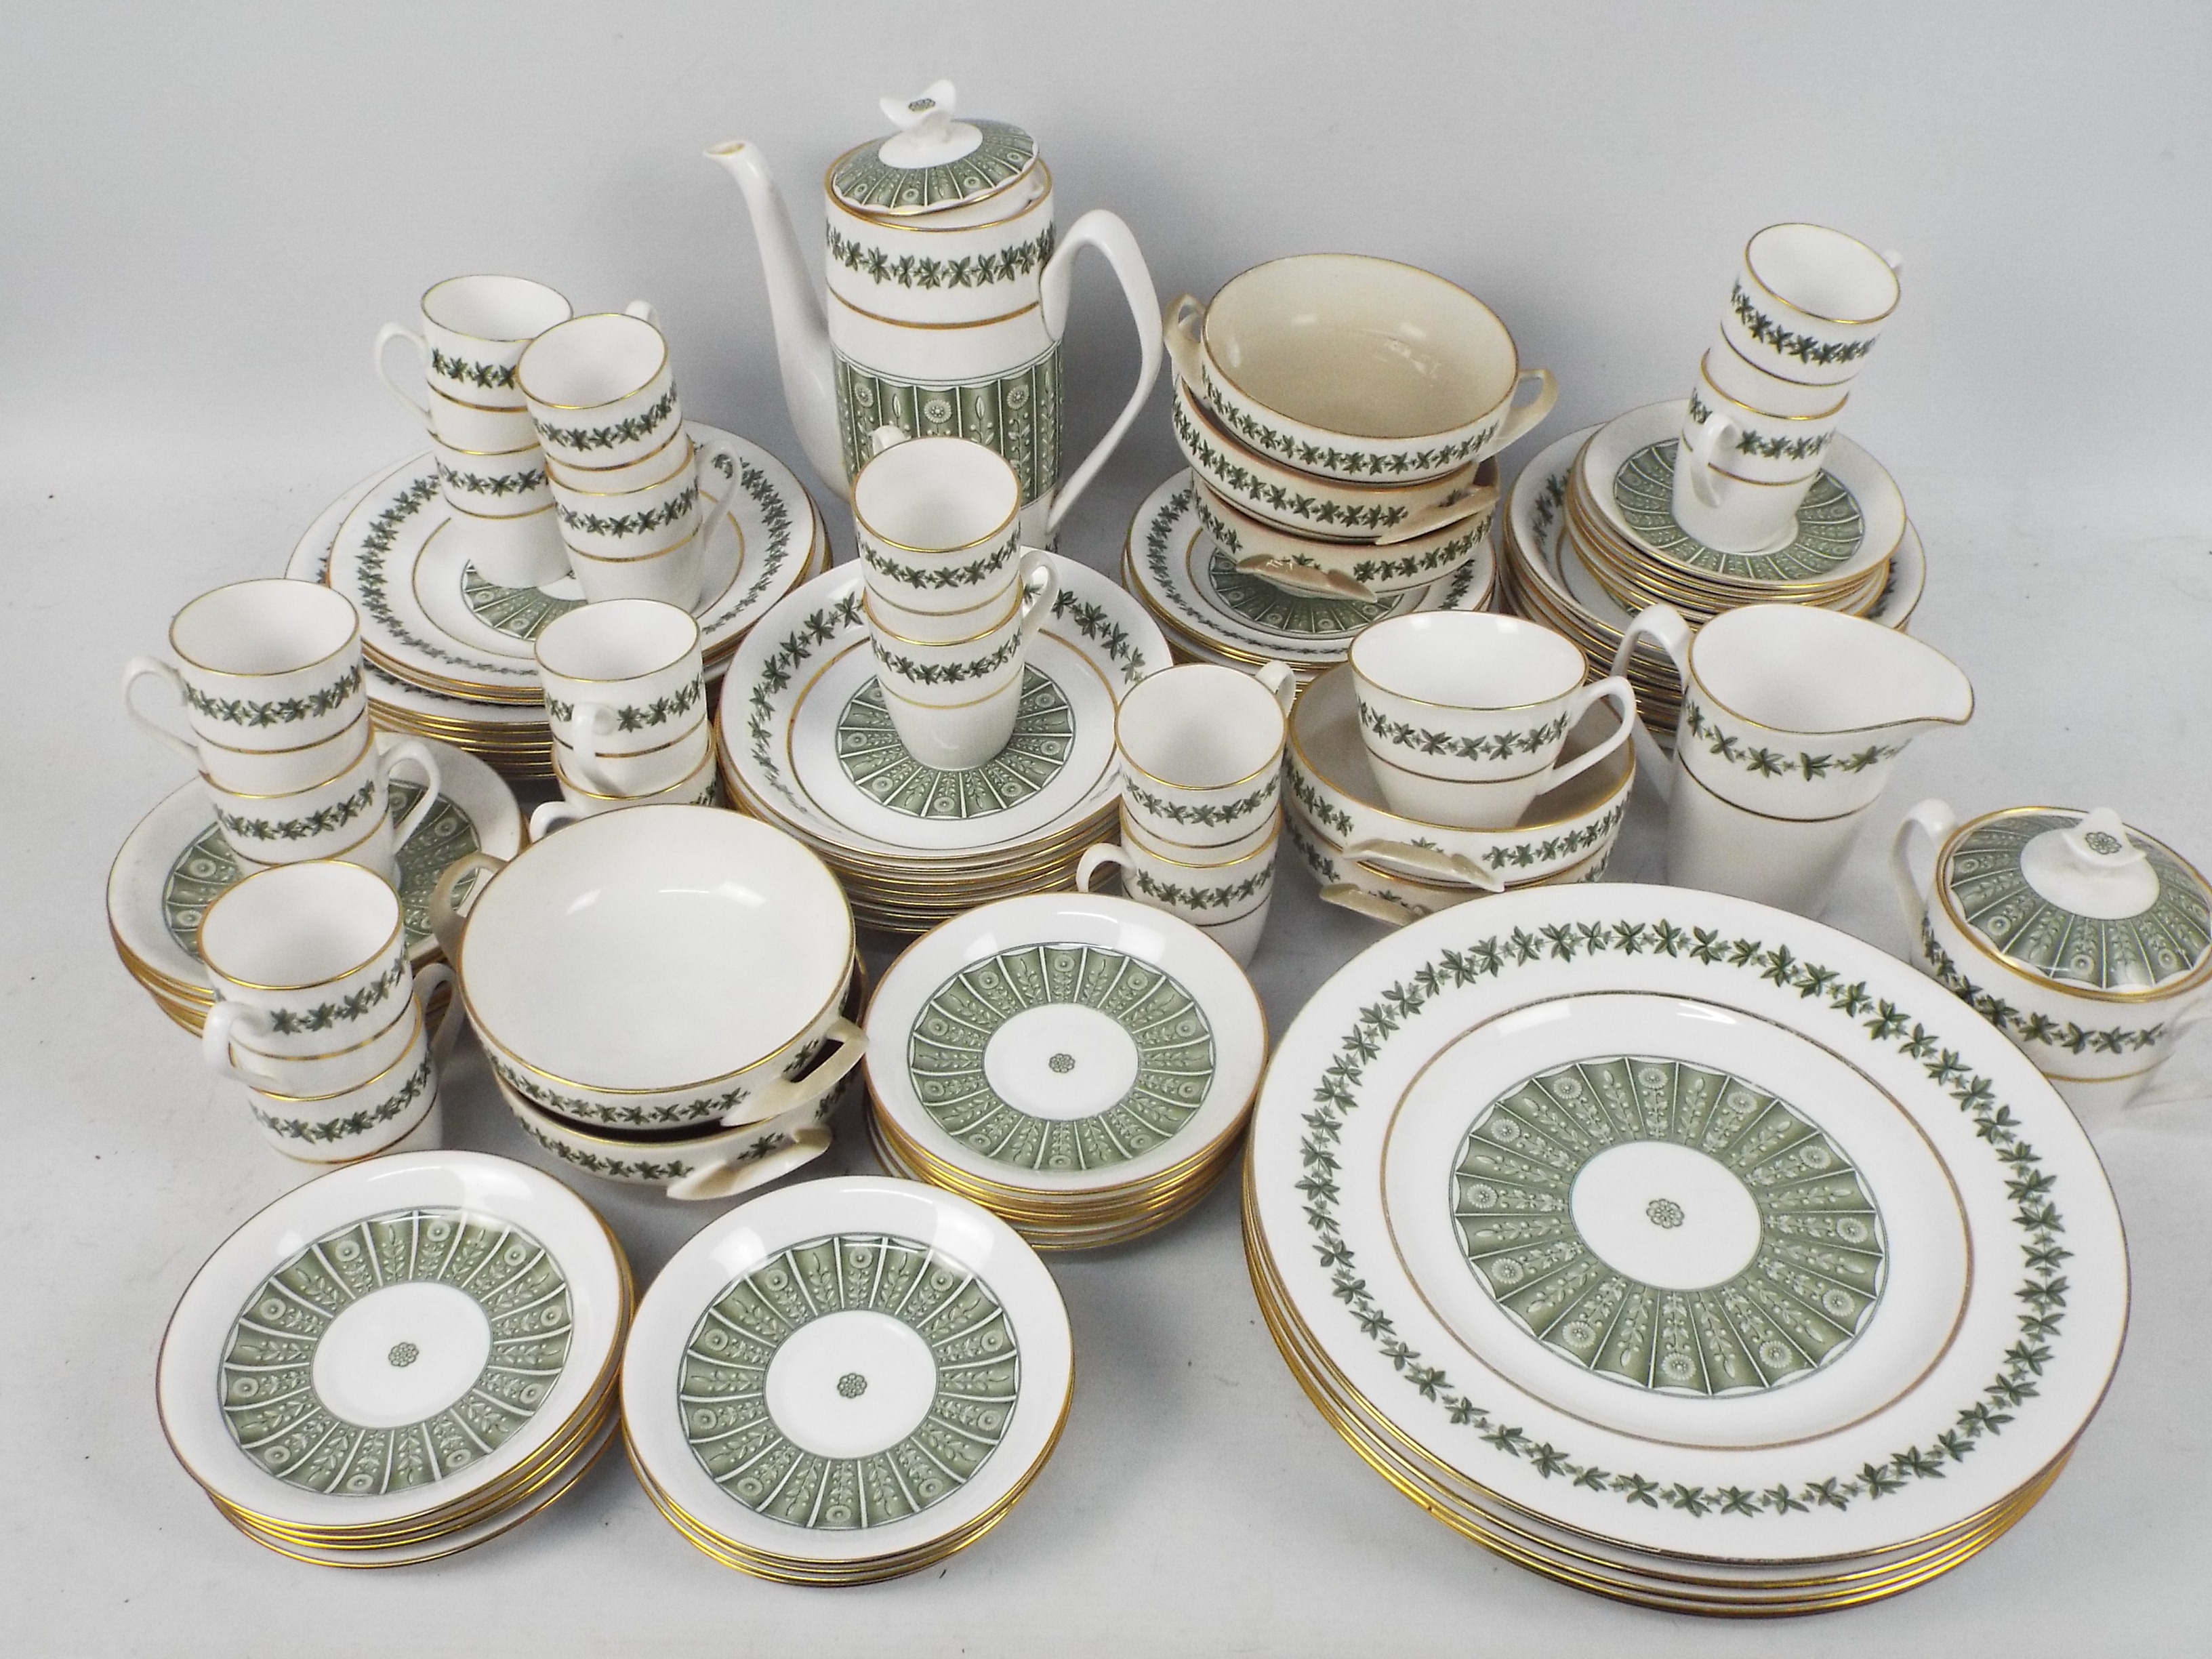 A quantity of Spode Provence pattern dinner and tea wares, approximately 100 pieces.